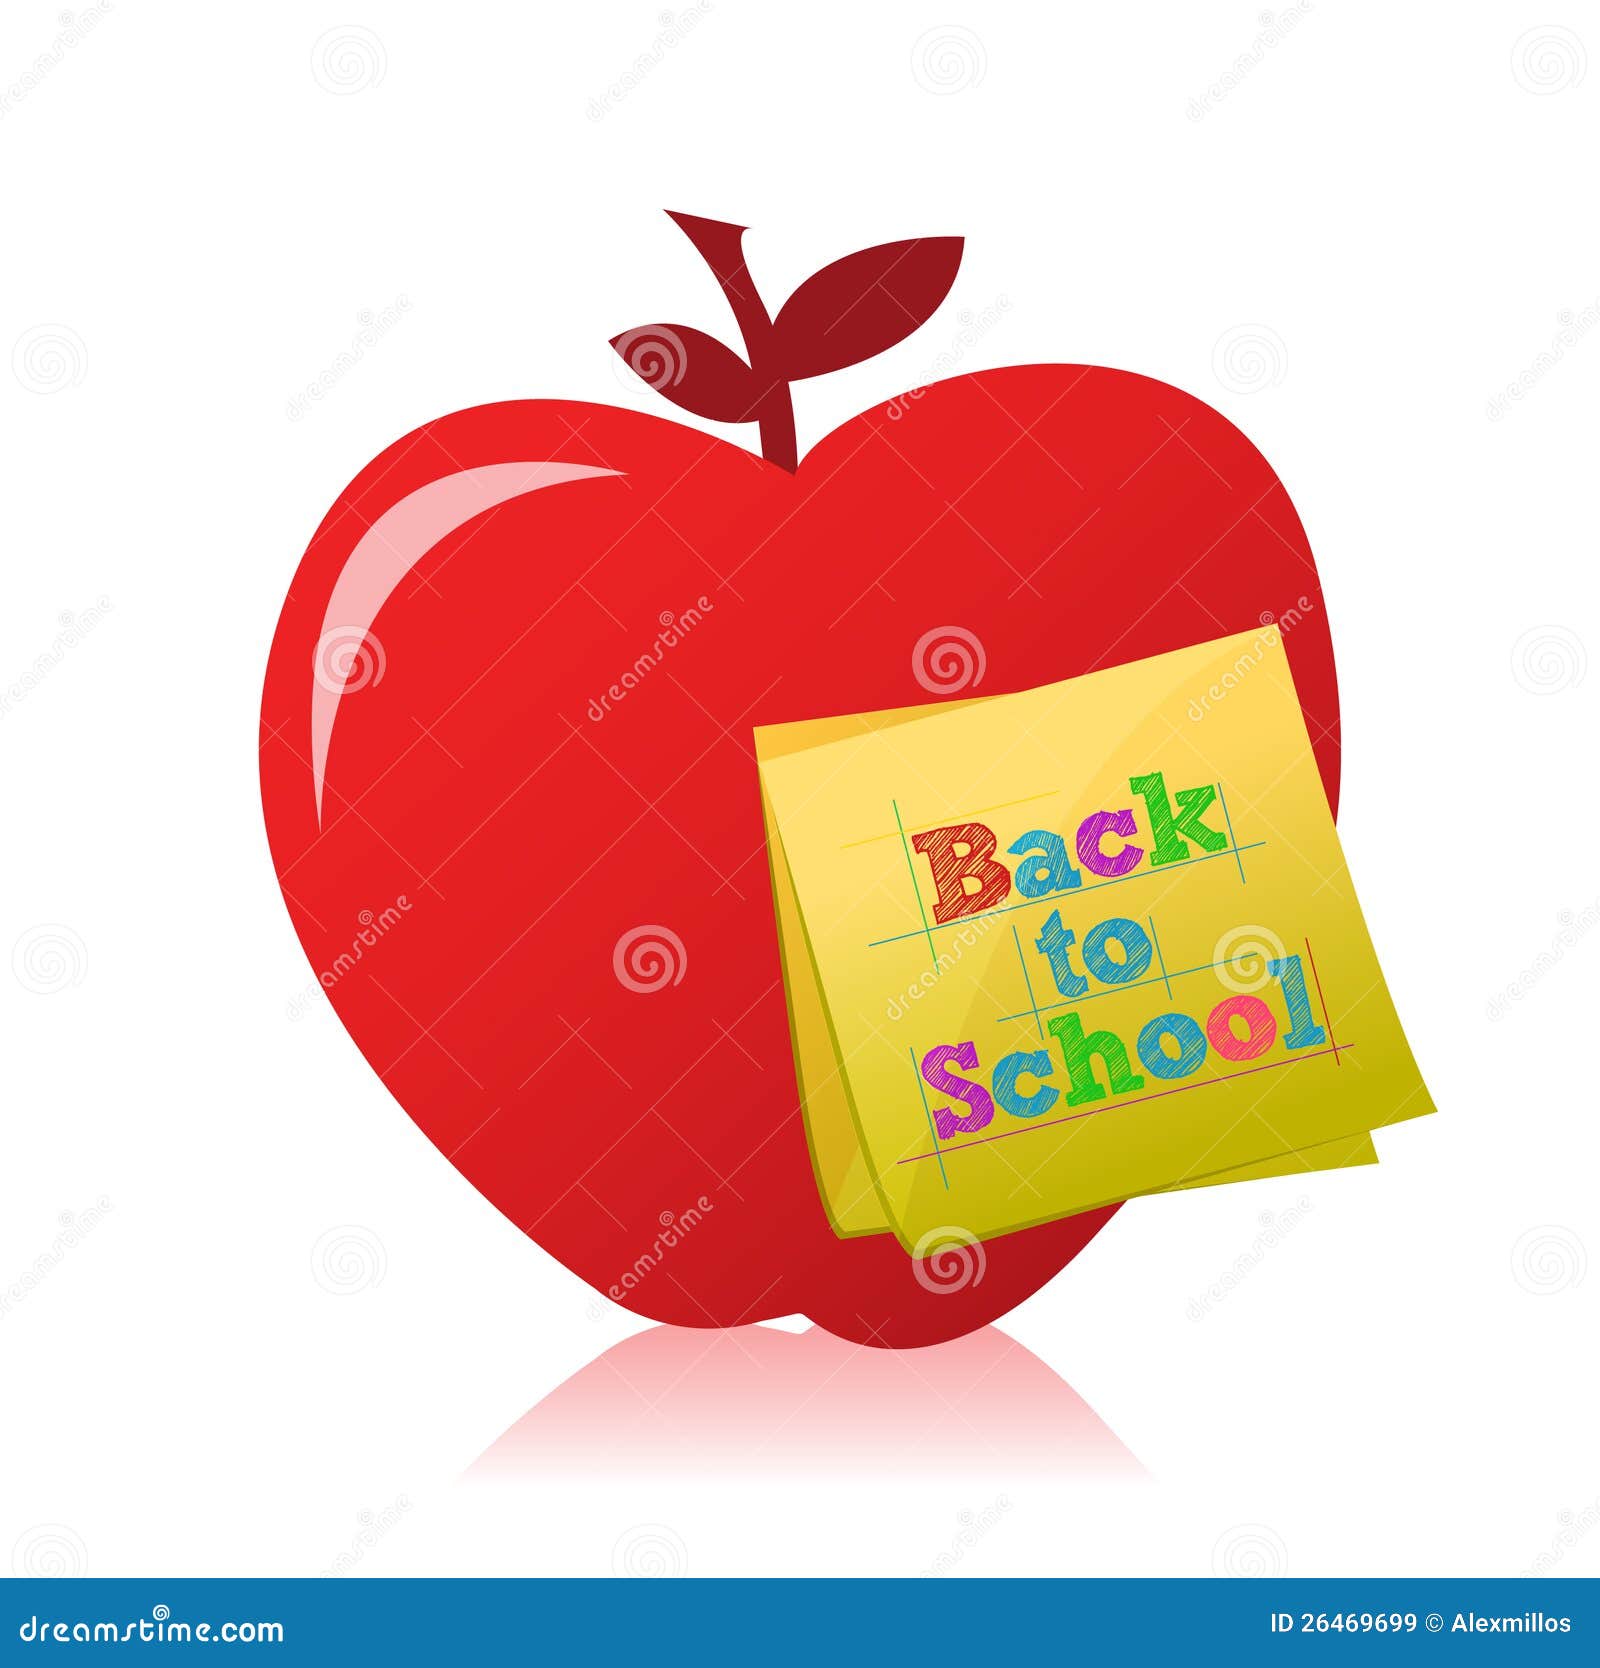 apple back to school clipart - photo #19